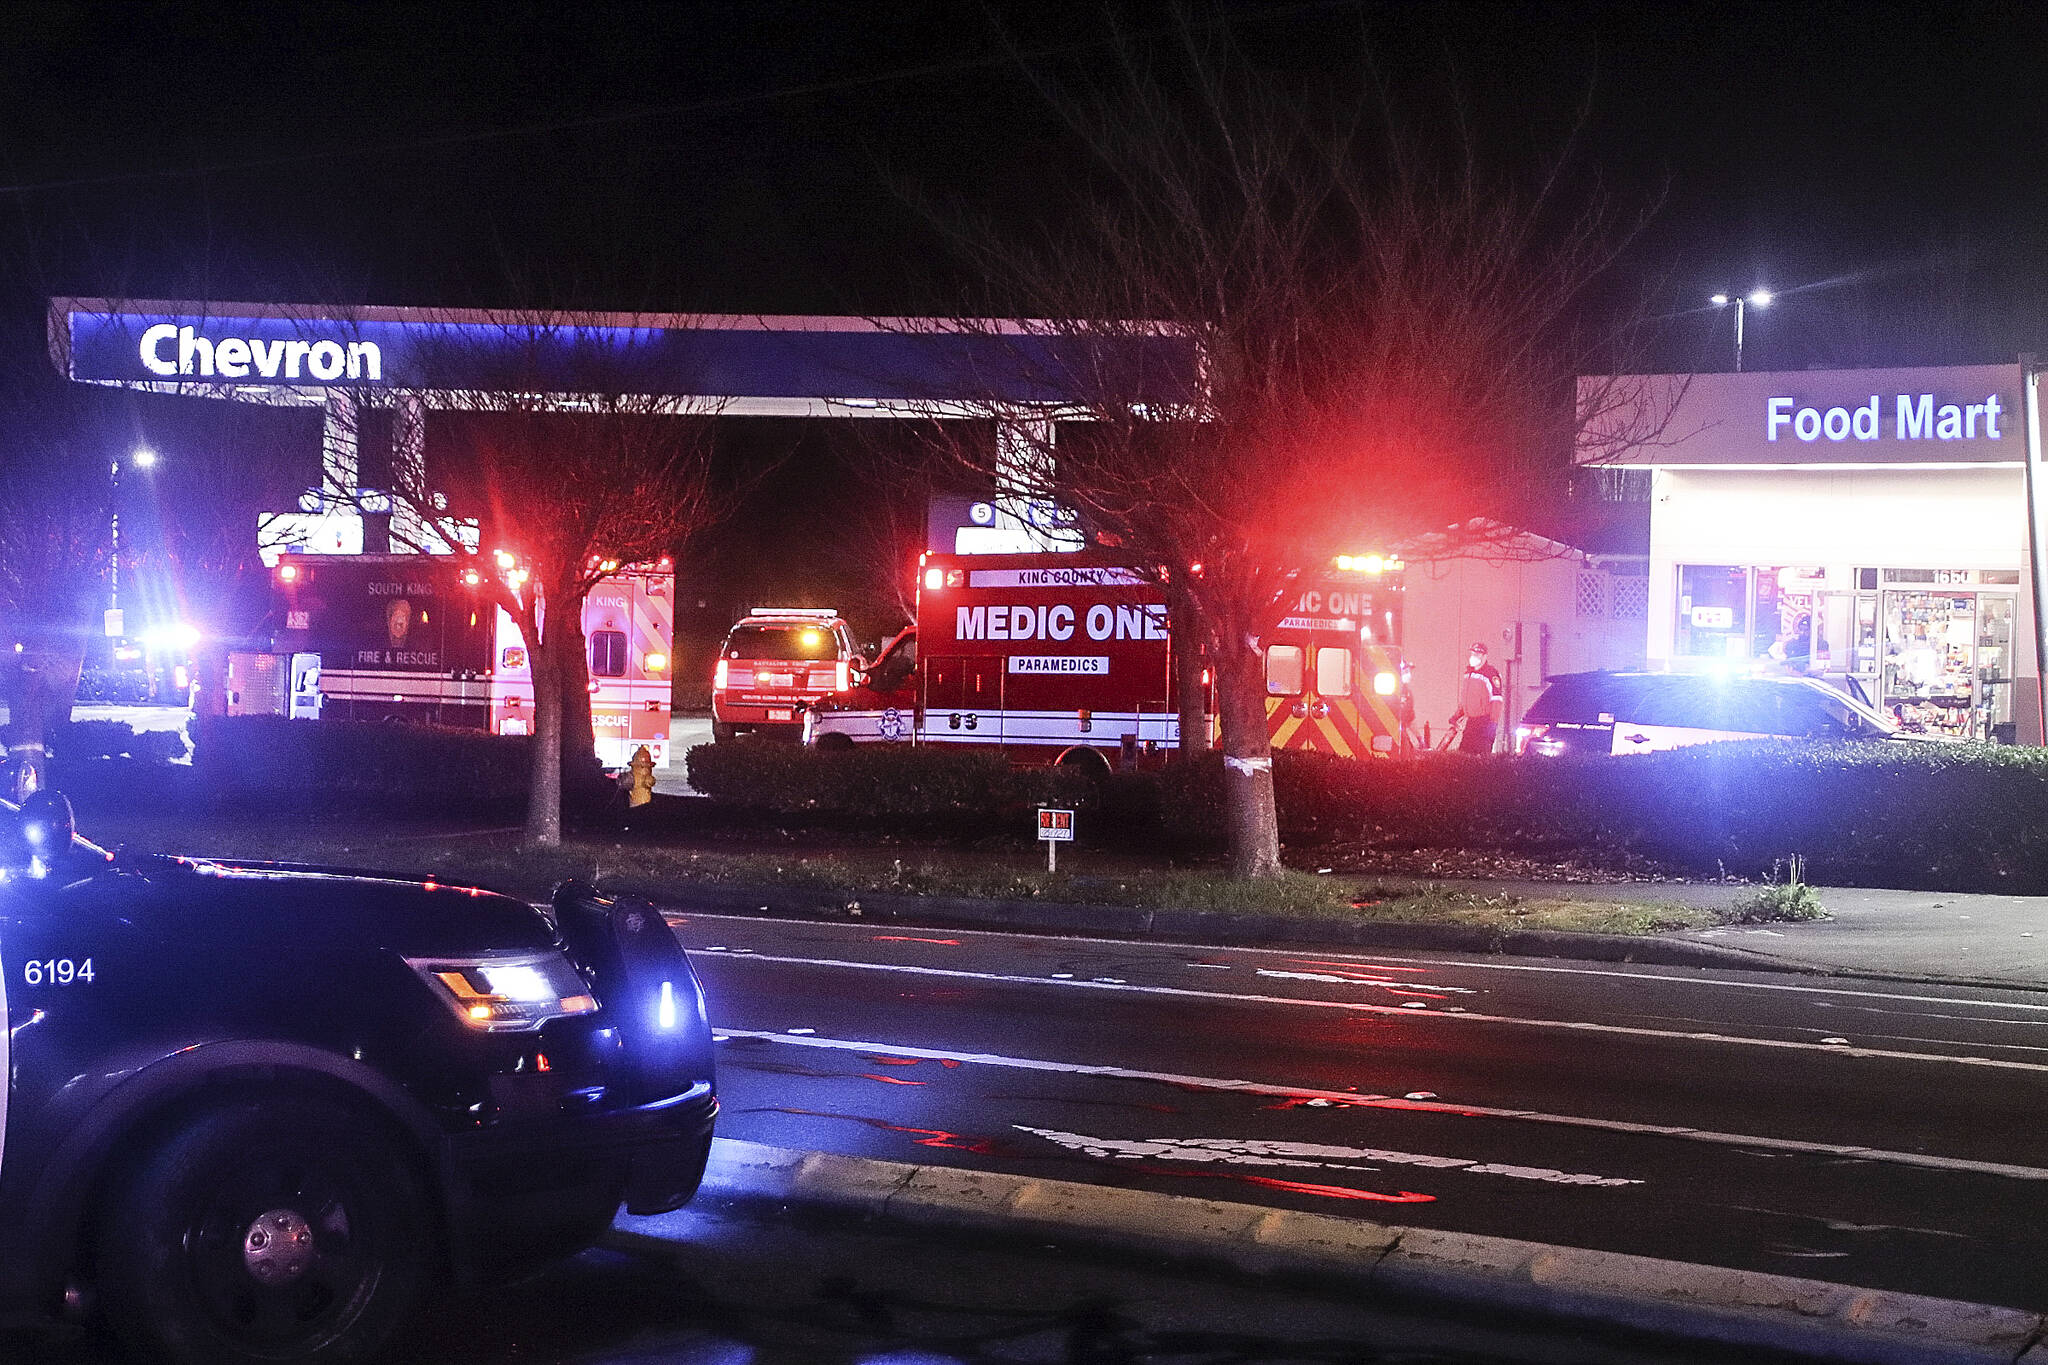 Officers and medics on scene at the Chevron gas station along SW Dash Point Road after a shooting took place on Nov. 30. Photo courtesy of PNW Thinline photography